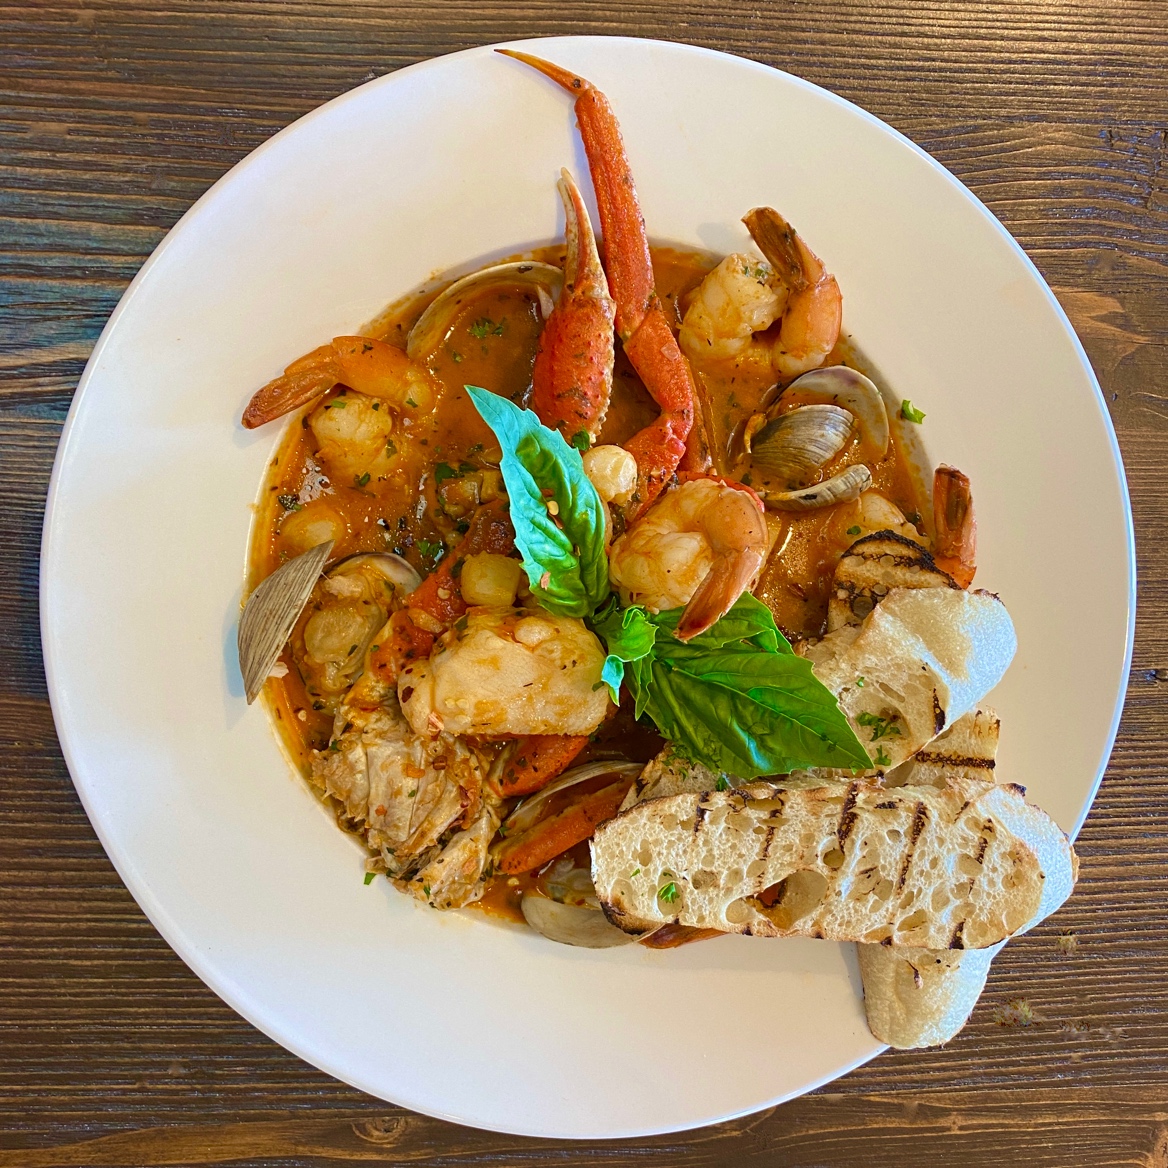 Wind down this wild winter weekend with our mouthwatering Cioppino. Enjoy this delicious dish featuring clams, scallops, shrimp, cod and crab in a tomato broth with charred bruschetta for dipping. Place a reservation now at 775-787-1800 ext. 3 or online at Open Table.